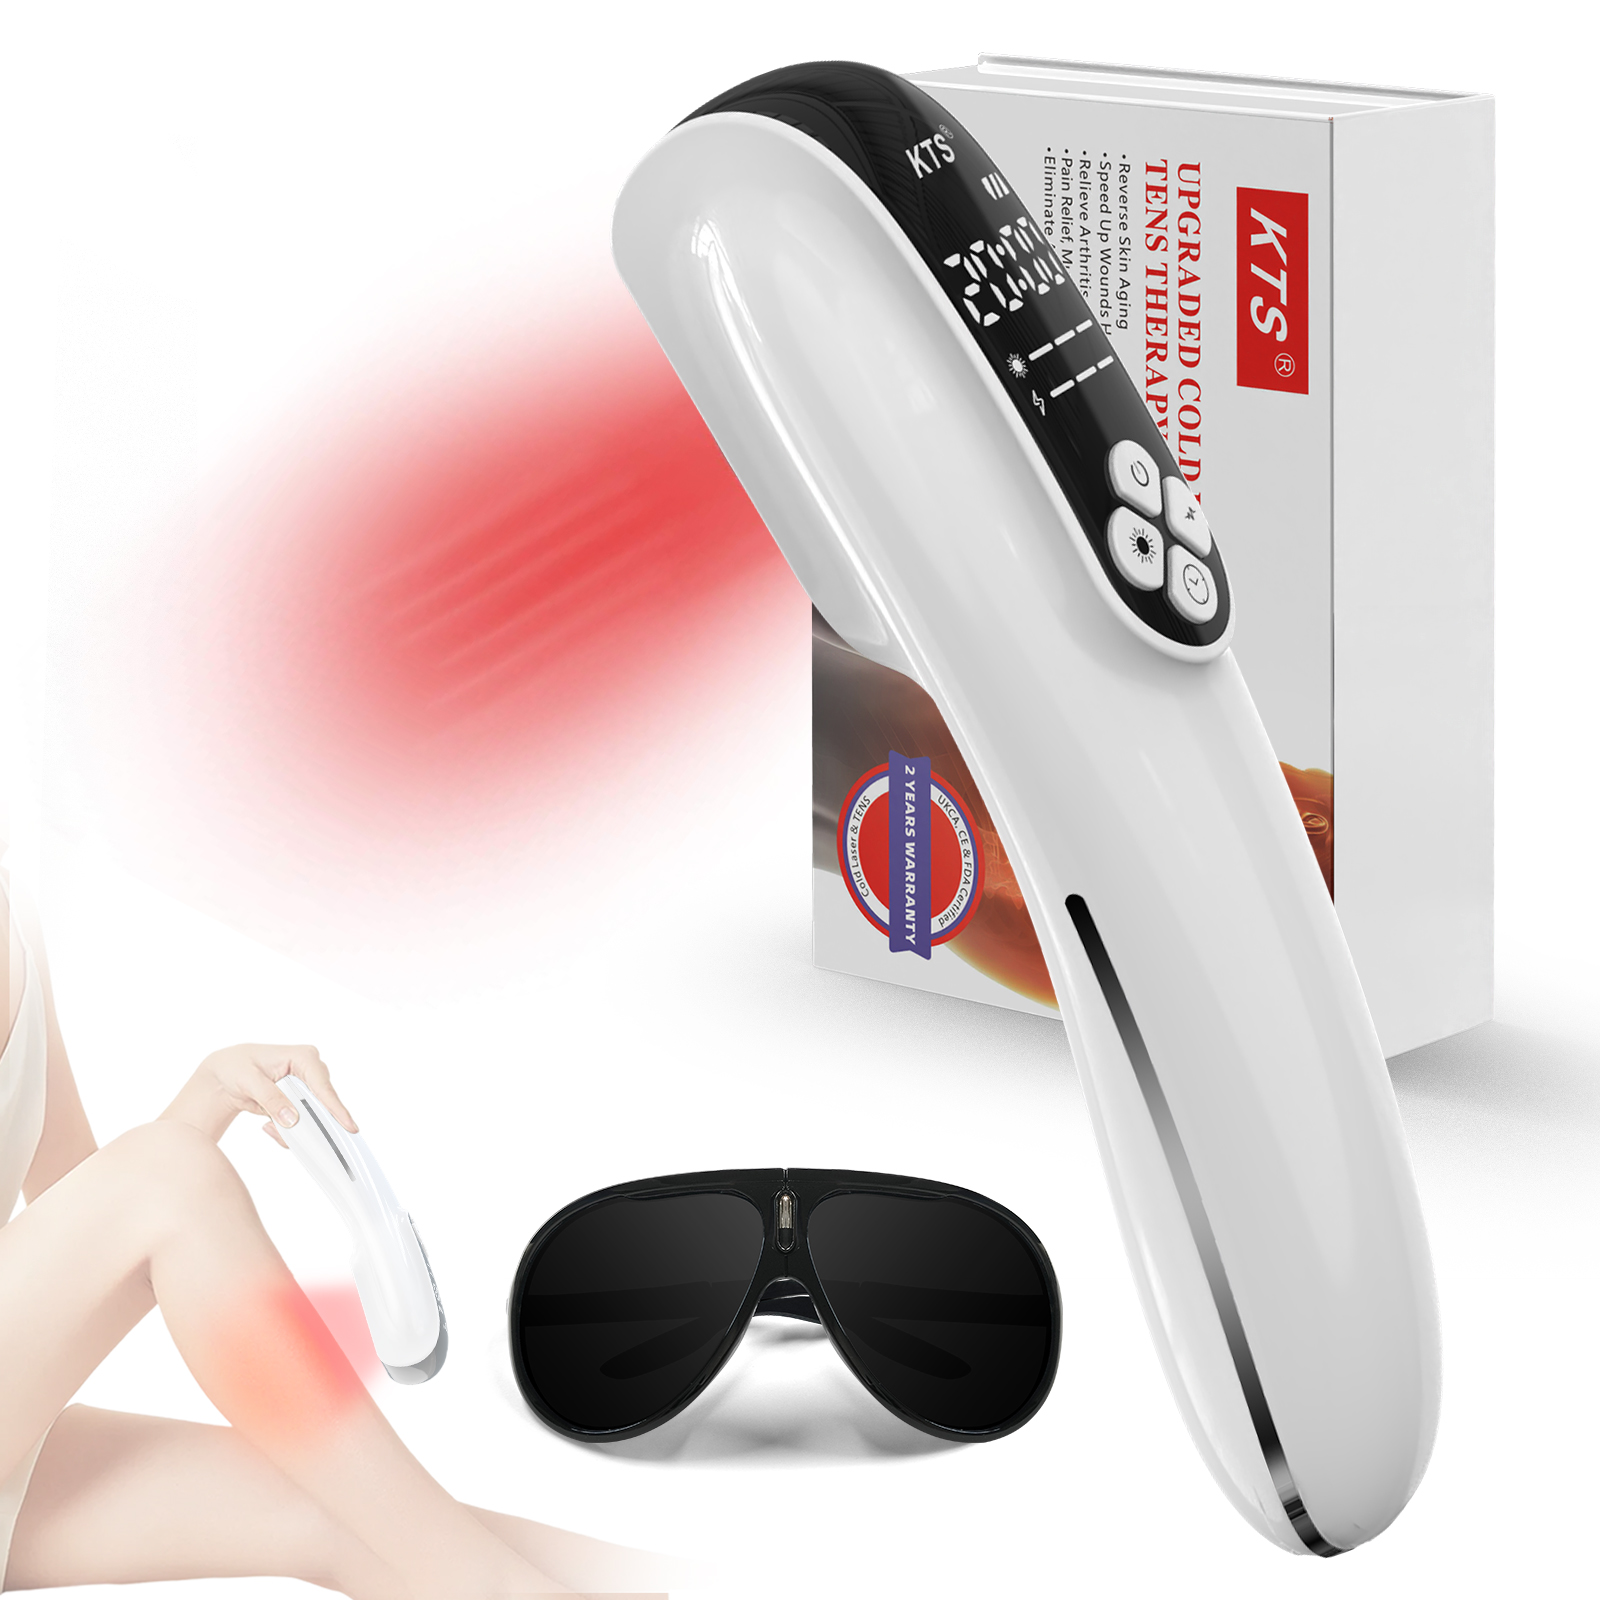 KTS 2.0 Cold Laser Therapy Device with Tens Muscle Stimulator for Body Pain Relief